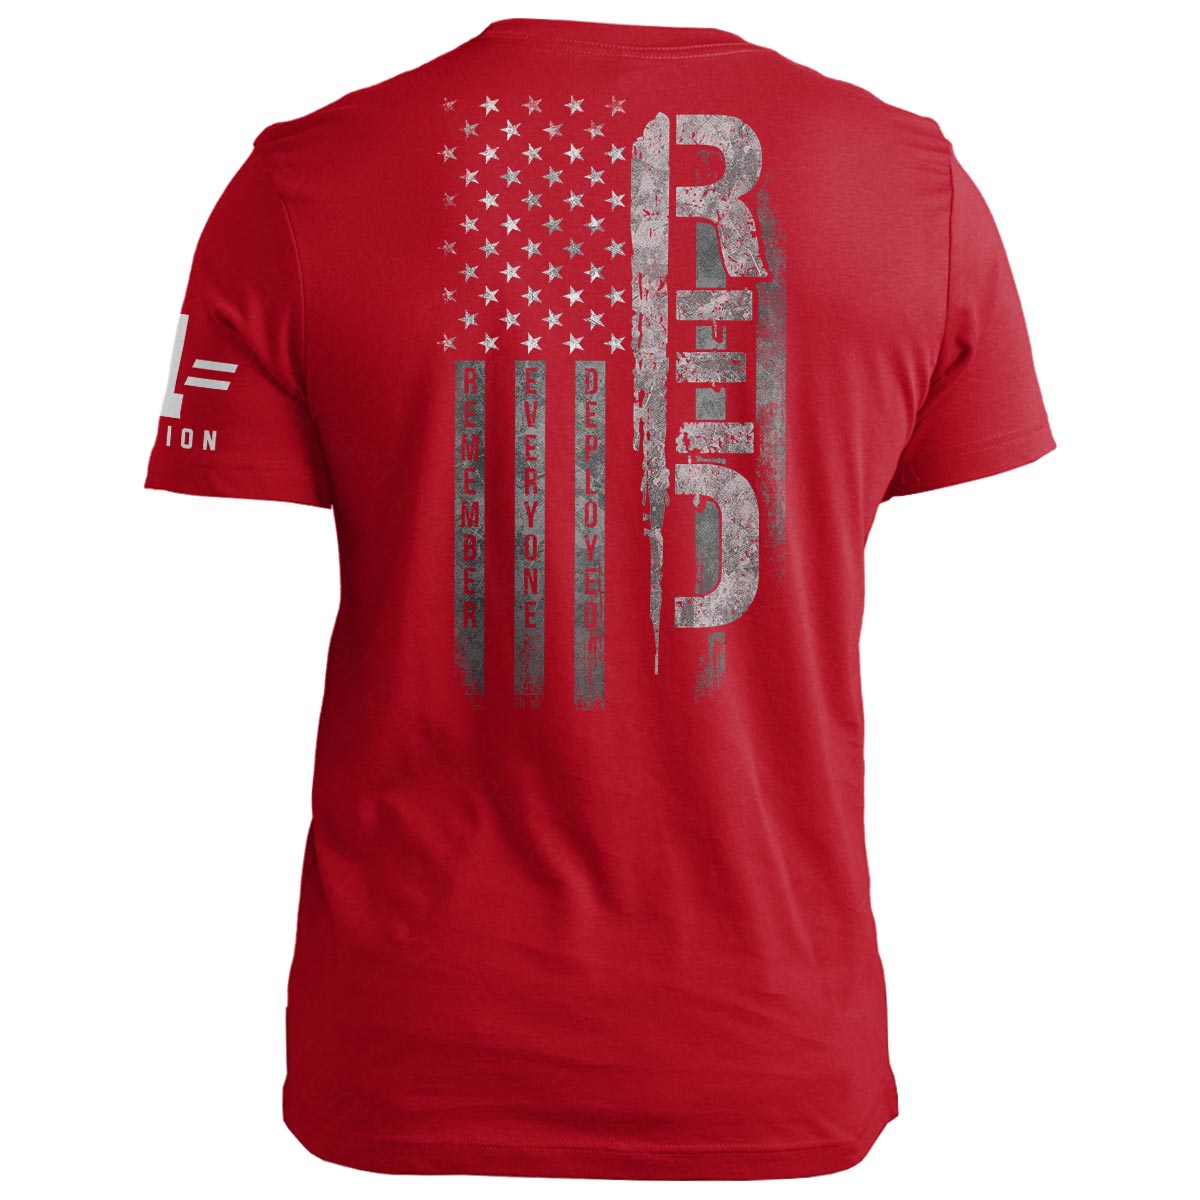 R.E.D. Remember Everyone Deployed Steel